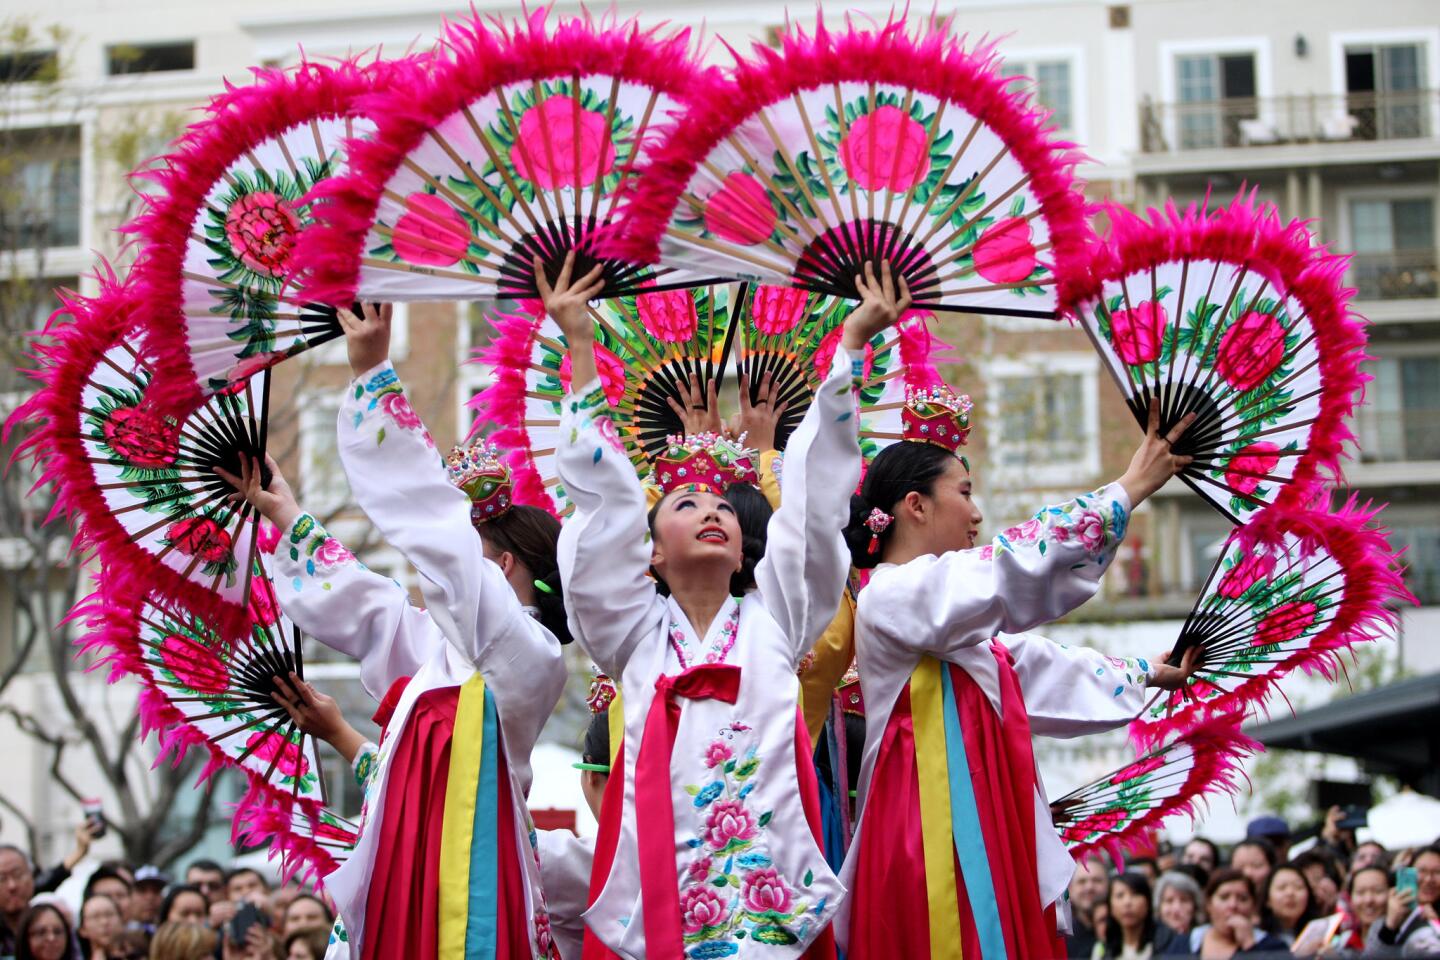 Hundreds of attendees watched performances by various acts, including the fan dance by the Kim Eung Hwa Korean Dance Company, at the Americana At Brand's Lunar New Year Celebration in Glendale on Saturday, Jan. 30, 2016. The event included the Lion Dance, the Dragon Dance, and an appearance by some of the actors from the hit television show Fresh Off The Boat.